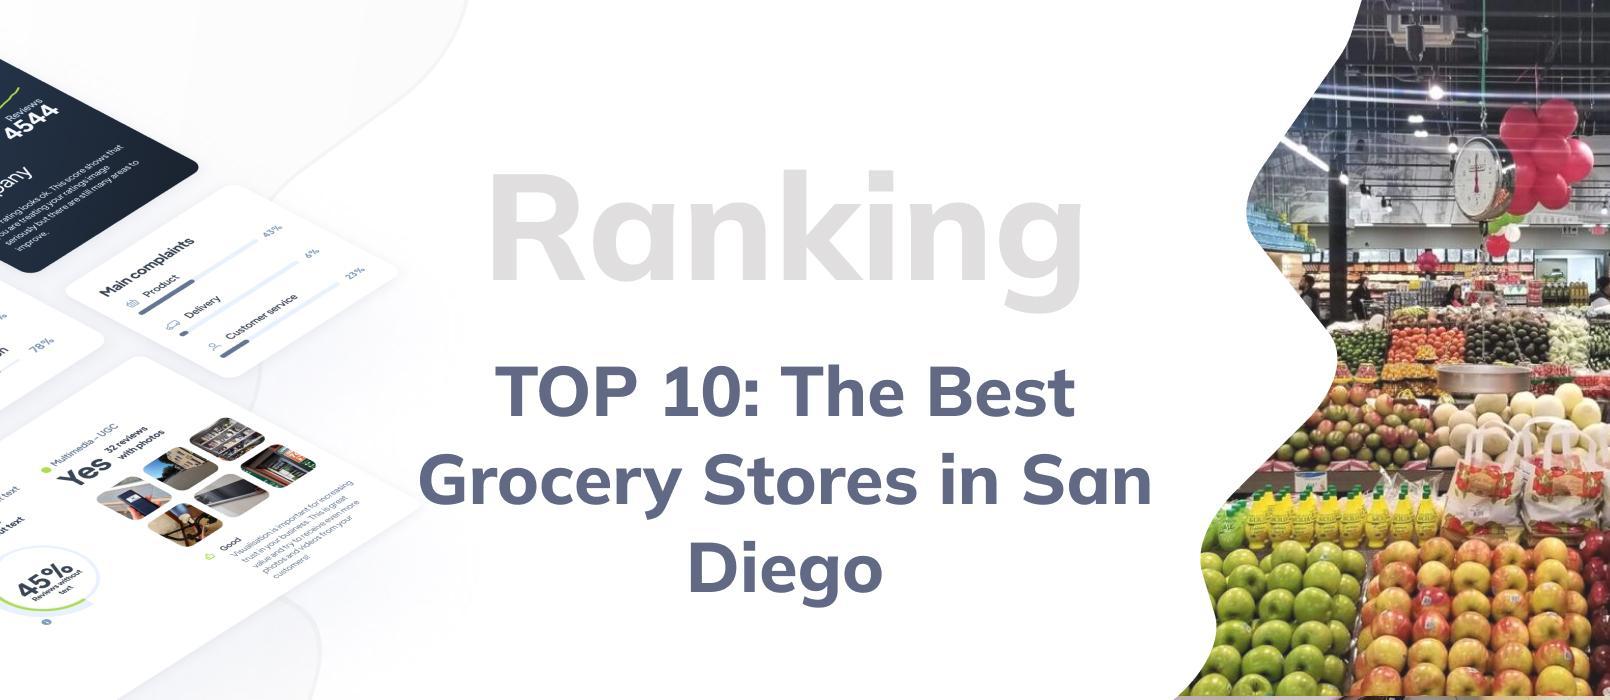 Grocery stores in San Diego - TOP 10 ranking